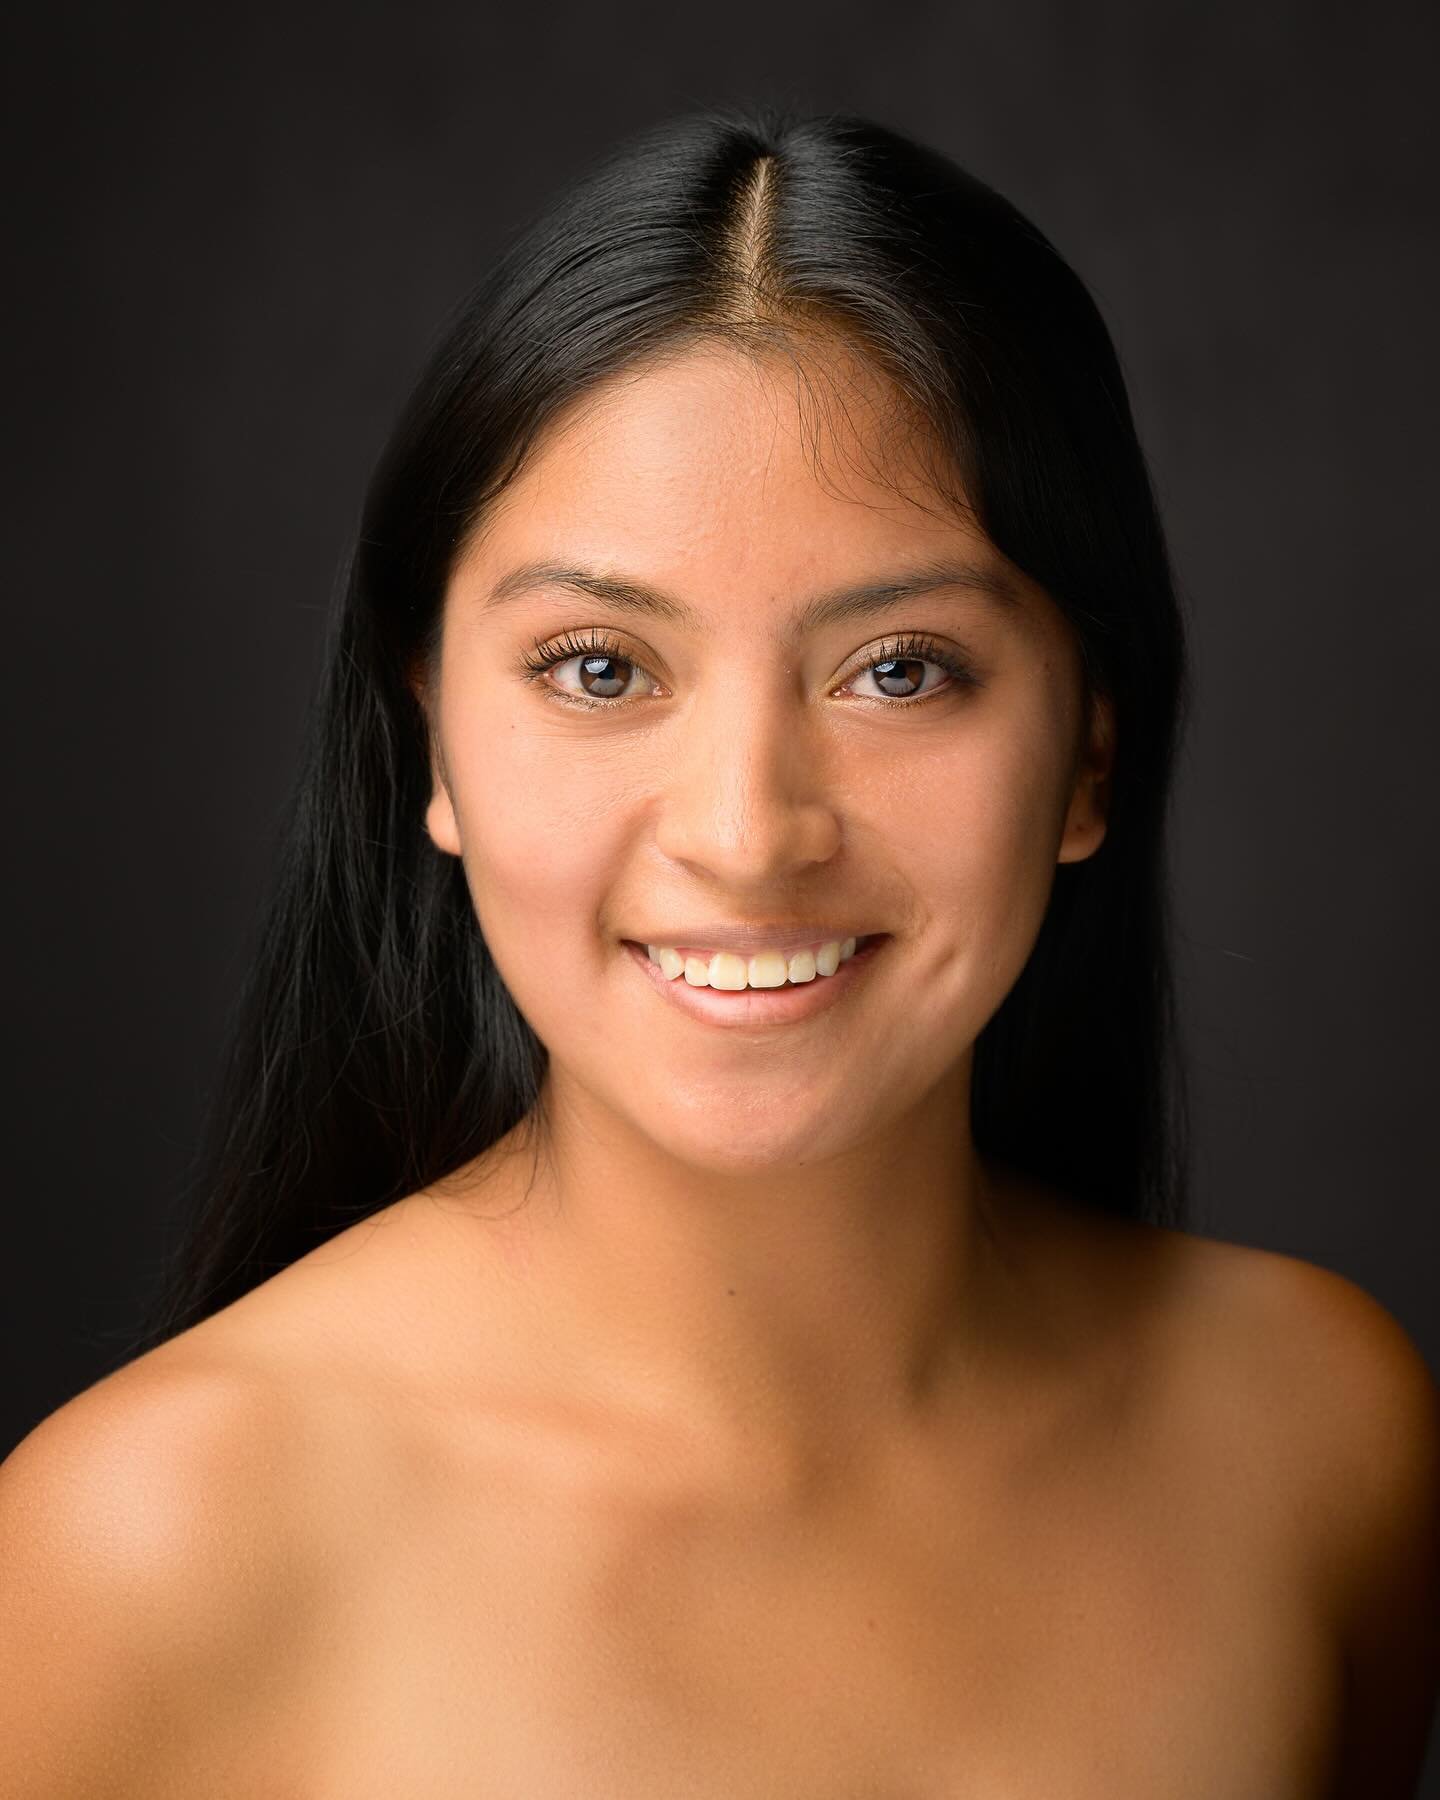 We recently held auditions for Artichoke Dance Company and are excited to introduce some of our new members! Help us give a warm welcome to Quetzali Hart! @quetzalihart 

Quetzali Hart is a New York based freelance dancer and choreographer. She grew 